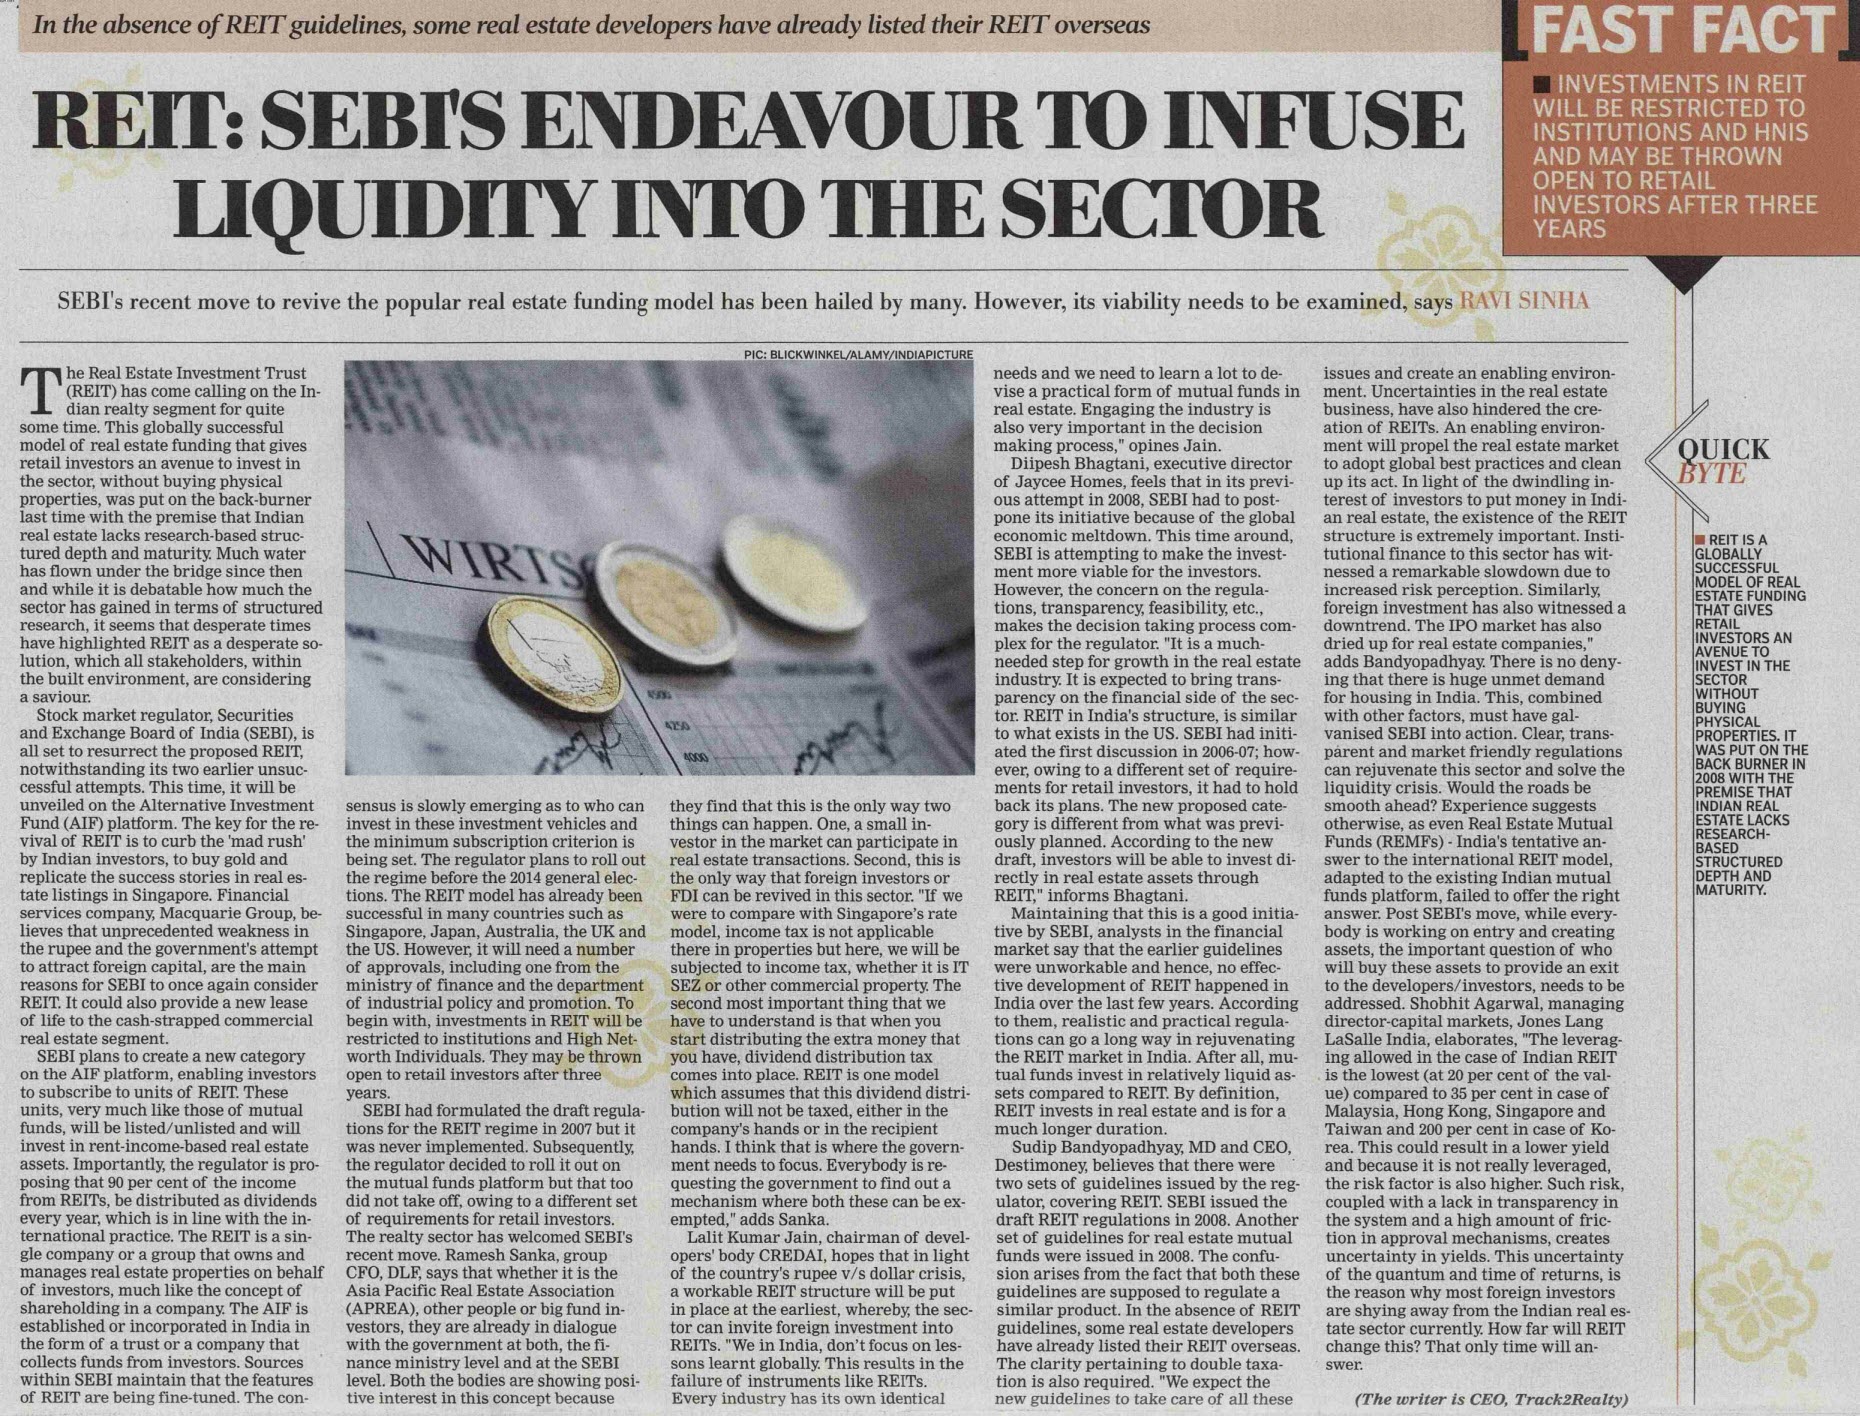 Reit: Sebi's Endeavour To Infuse Liquidity Into The Sector